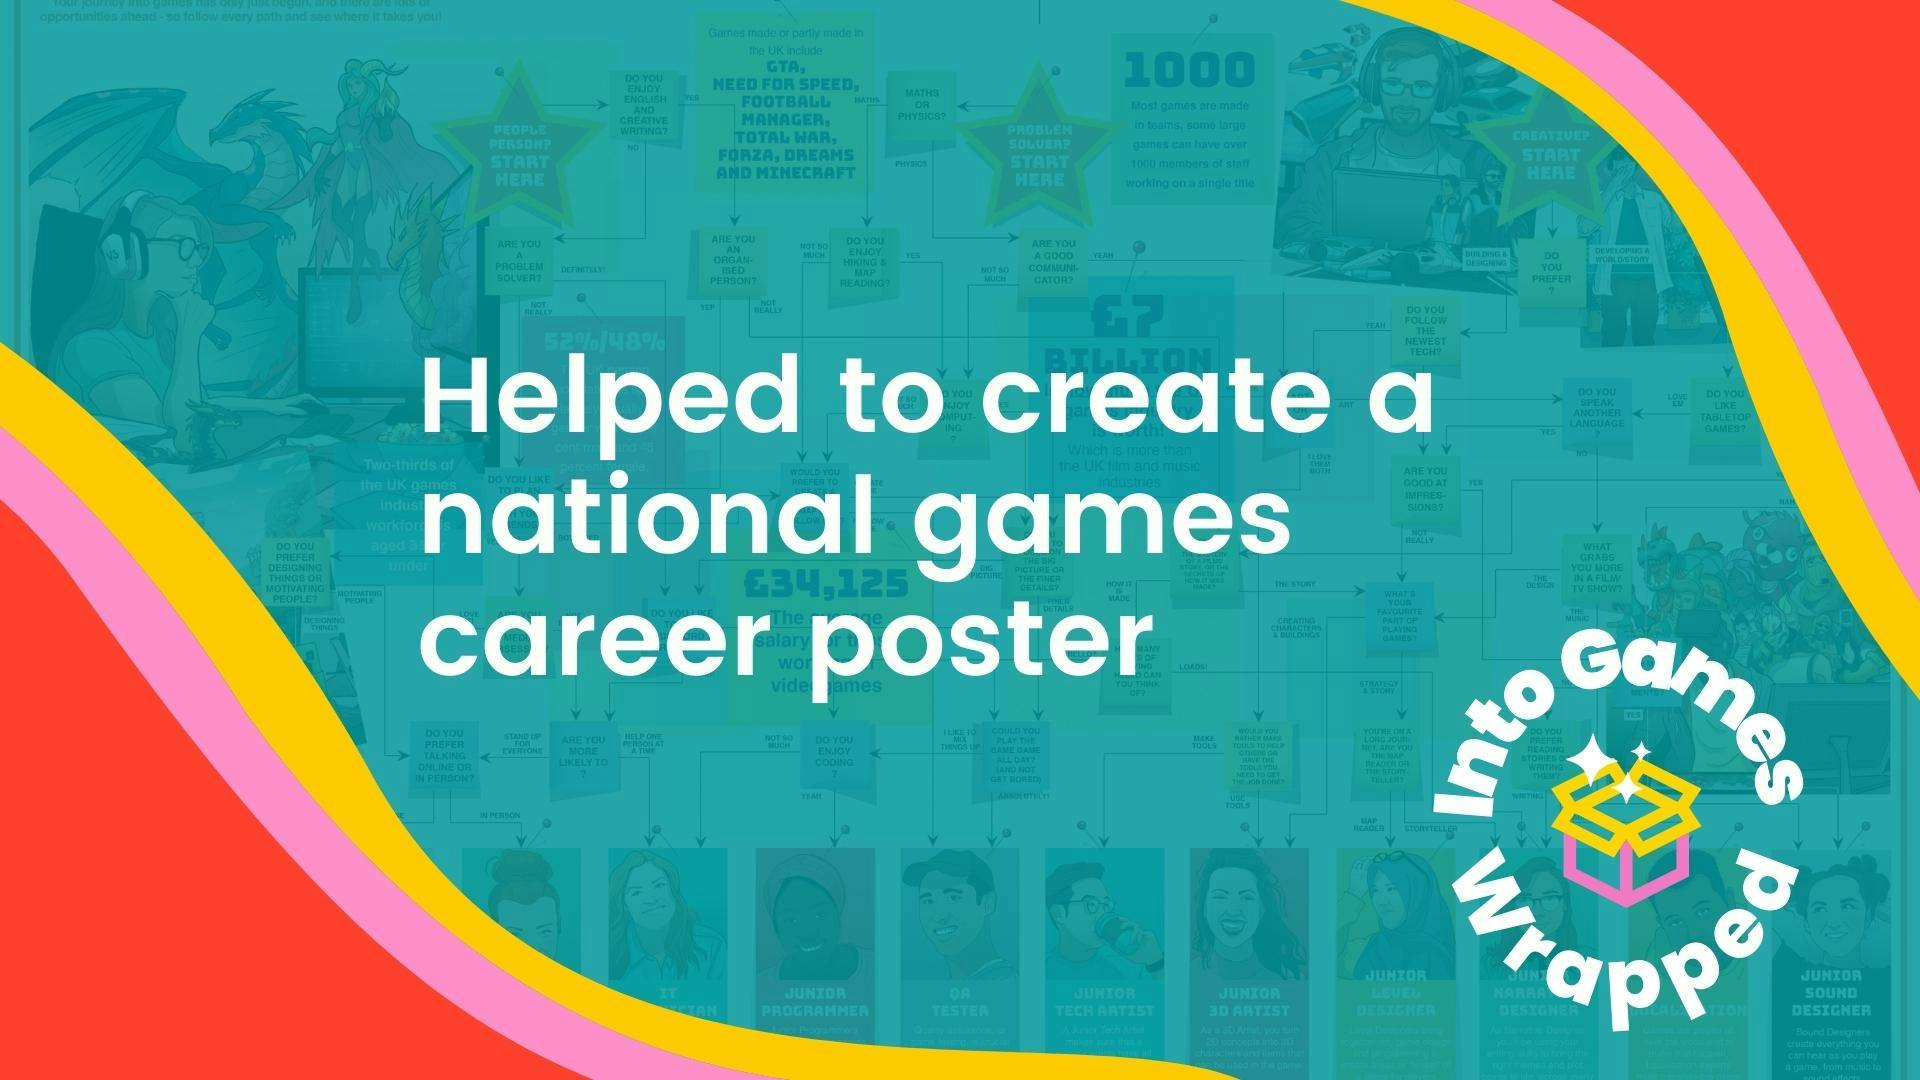 Helped to create a national games career poster